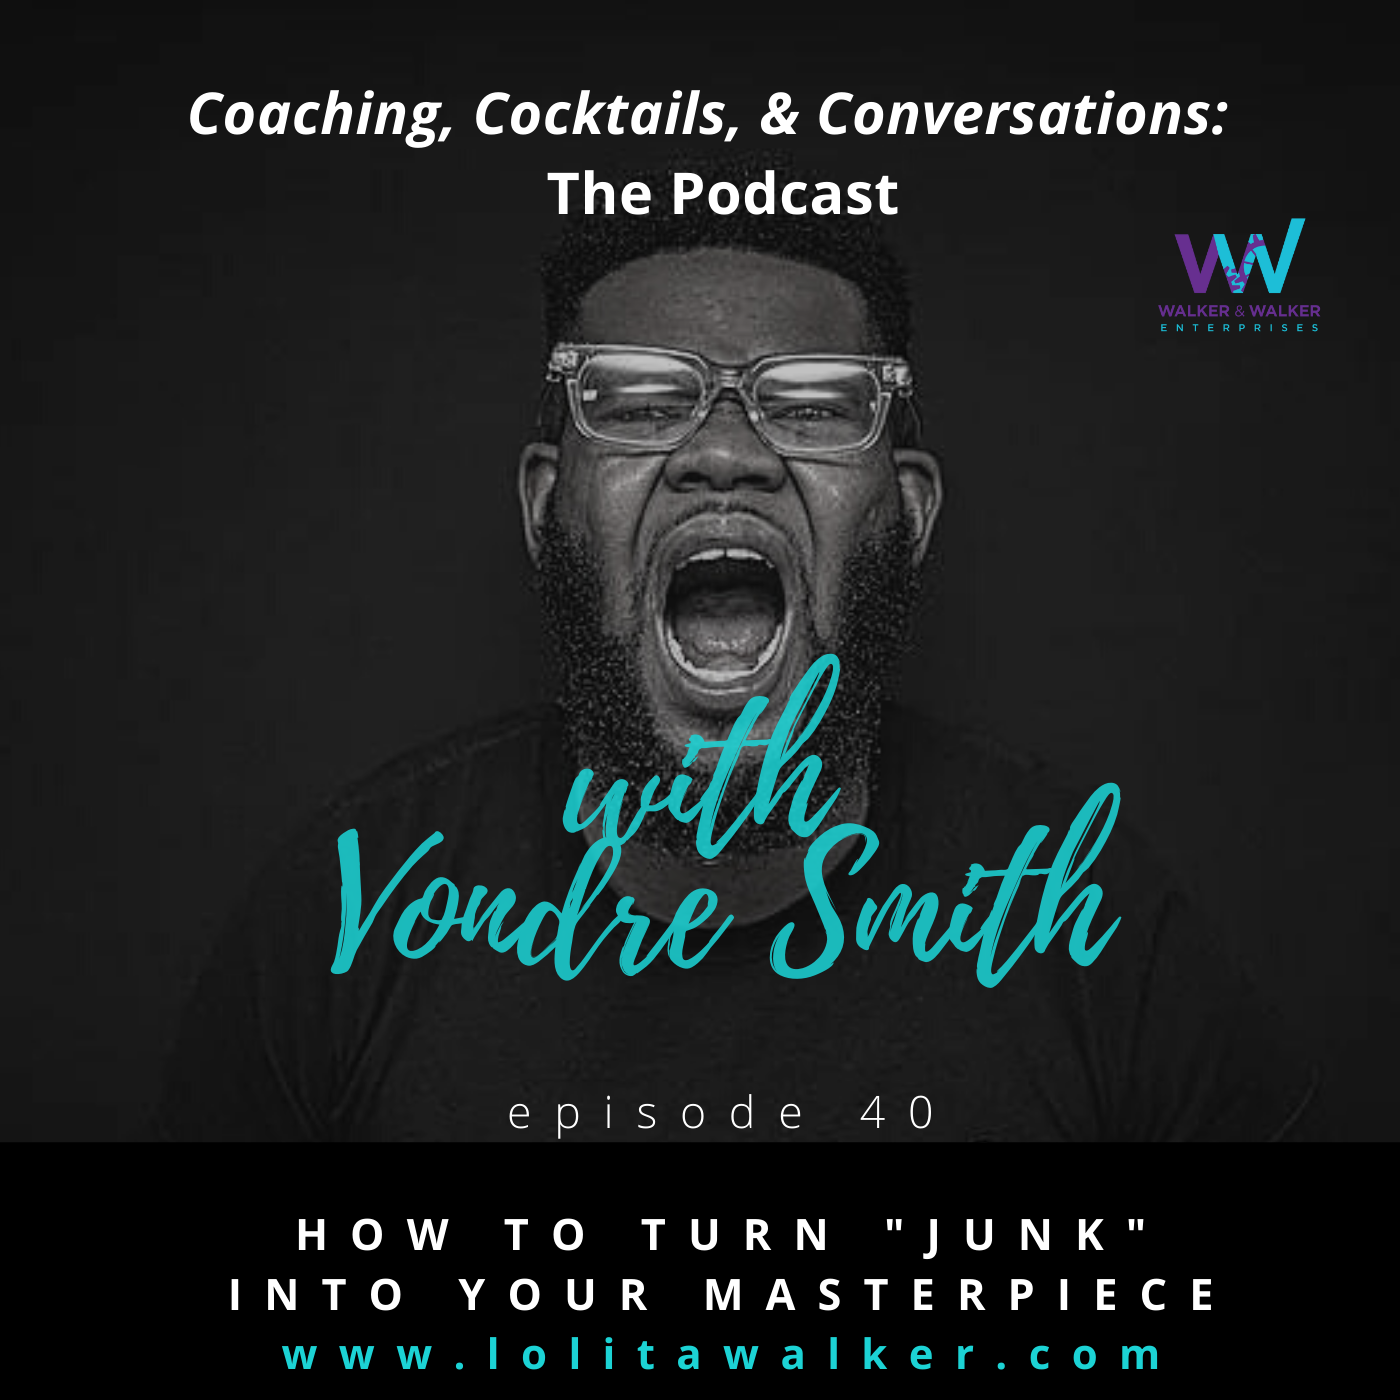 S2E40 - How to Turn Perceived &#34;Junk&#34; into Your Masterpiece (with Vondre Smith)